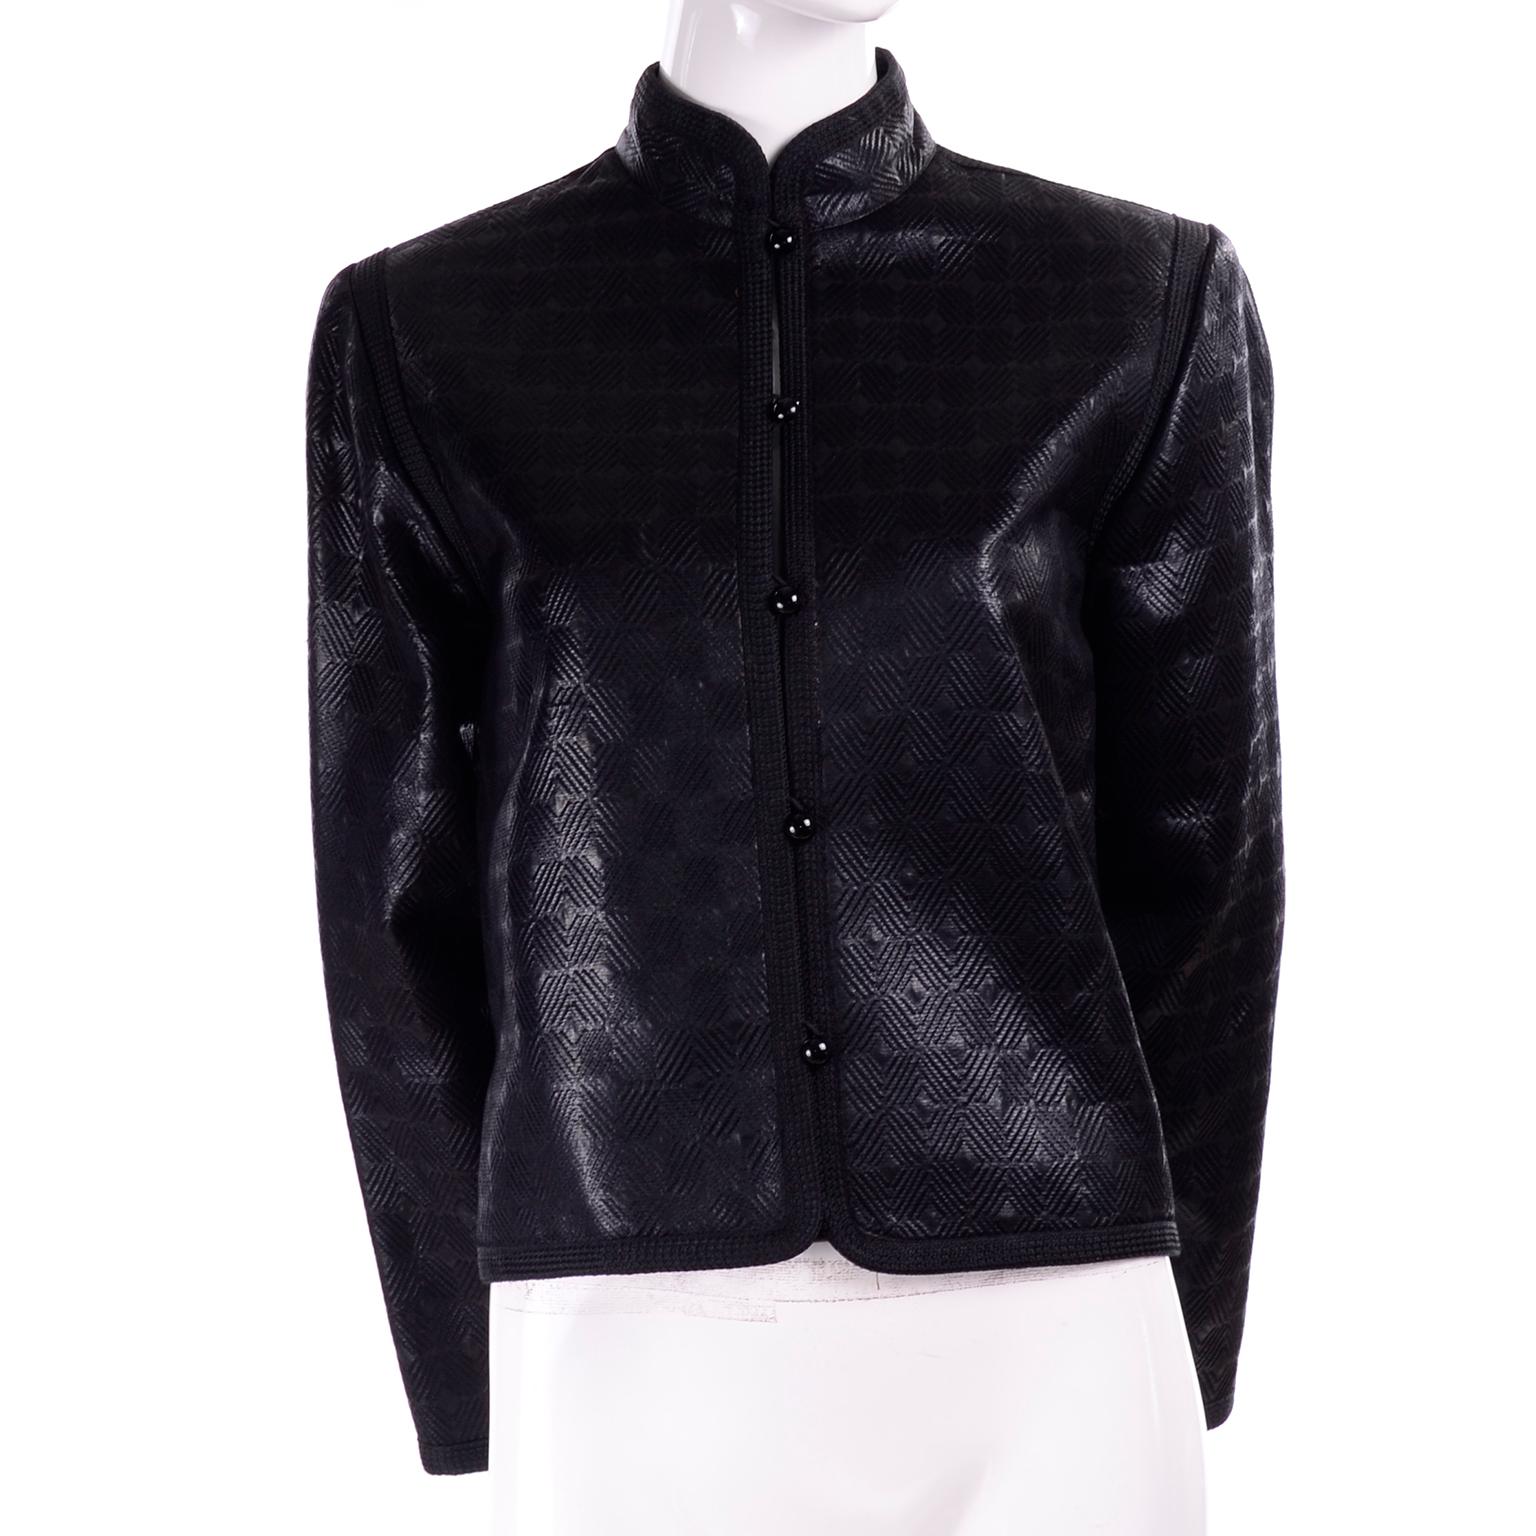 1970s Yves Saint Laurent Black Textured Russian Inspired Jacket W/ Red Lining (Schwarz)